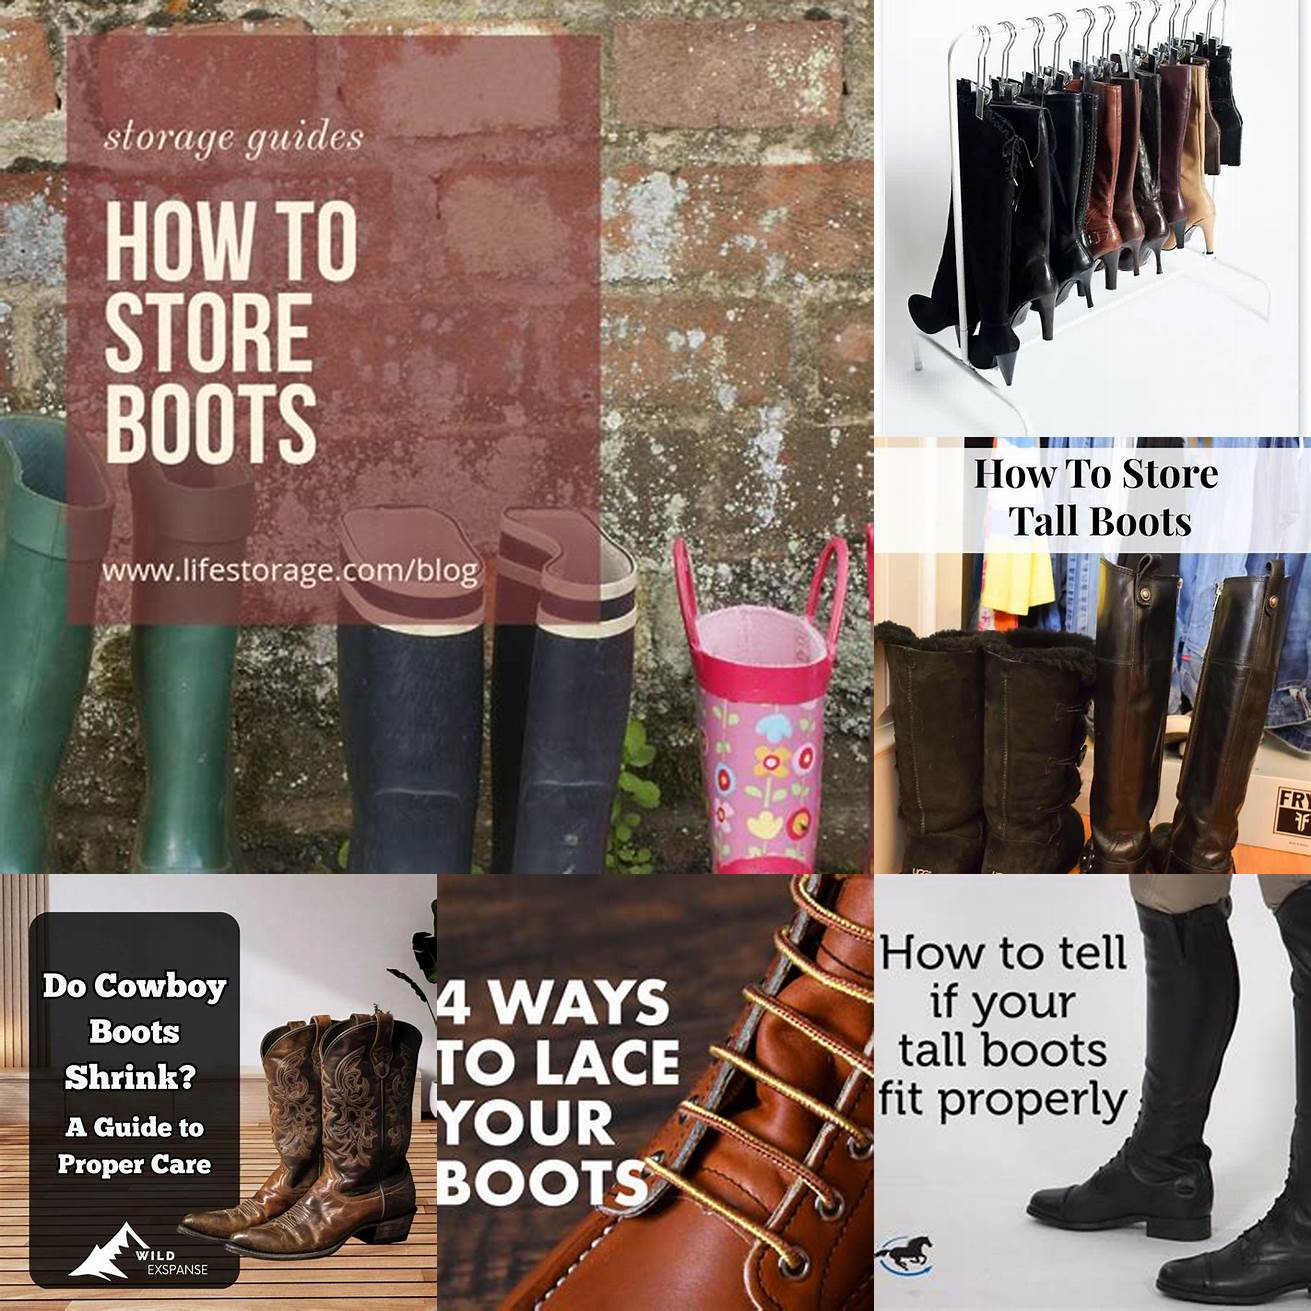 4 Store your boots properly when not in use